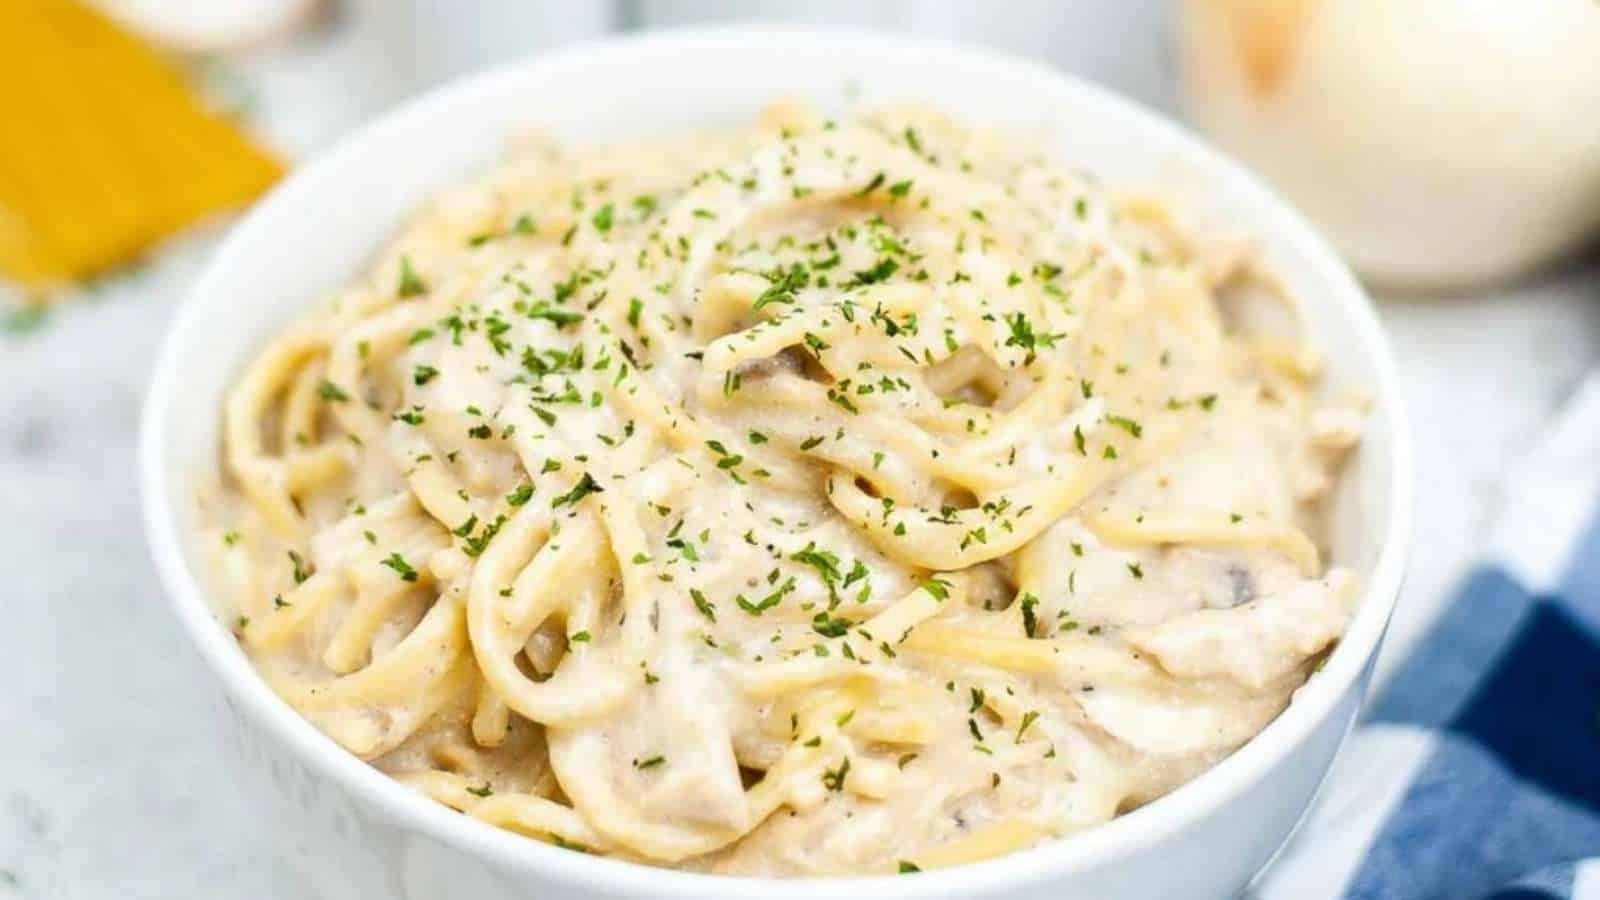 A bowl of pasta with mushrooms and parmesan cheese.